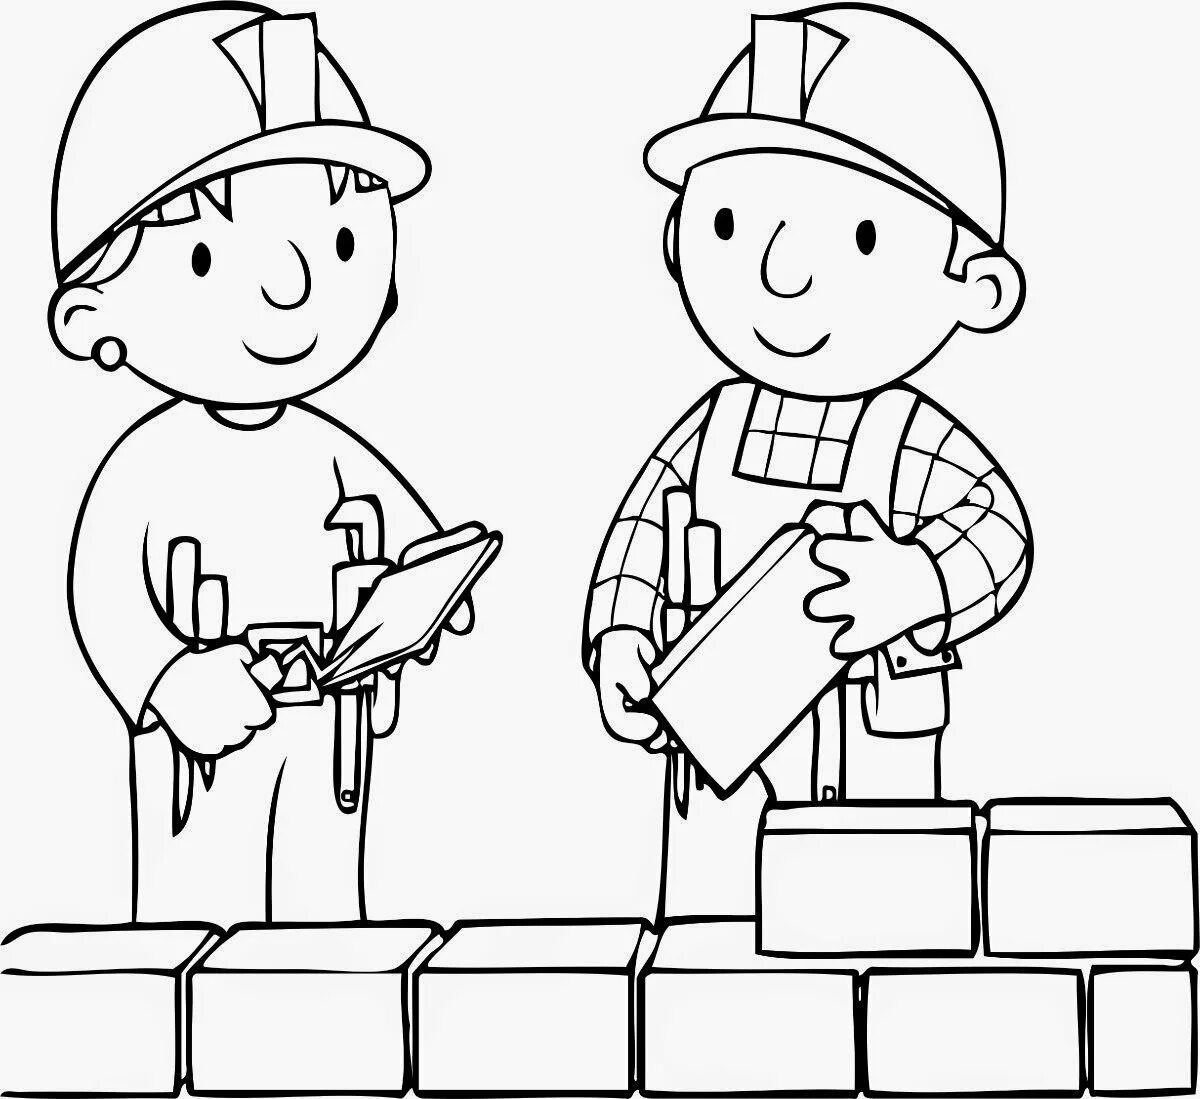 Animated labor protection through the eyes of children for preschoolers